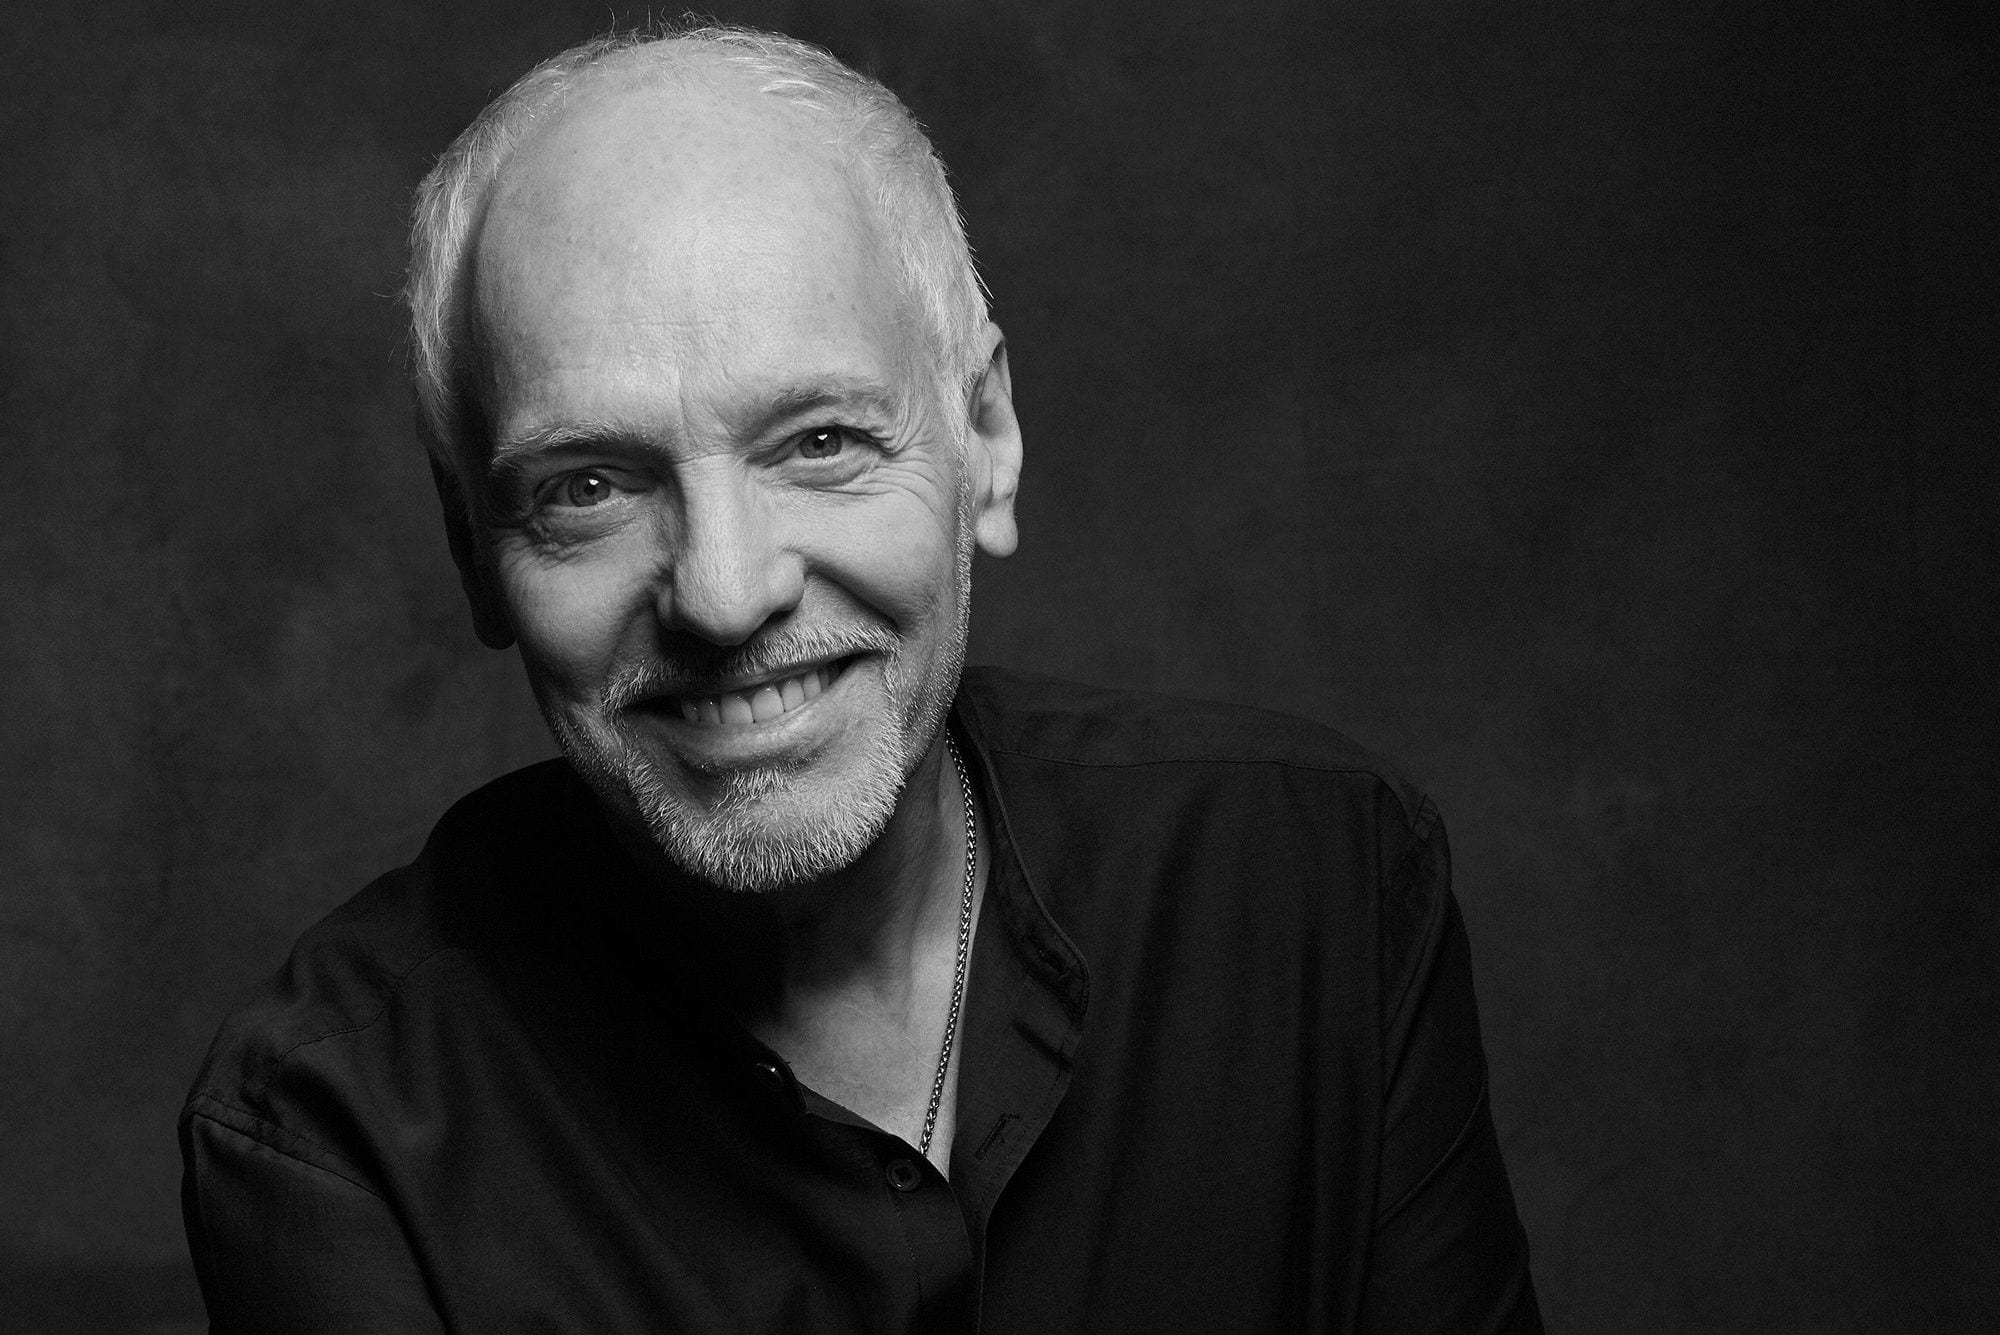 Peter Frampton Asks “Do You Feel Like I Do?” in Rock-Solid Book on Storied Career